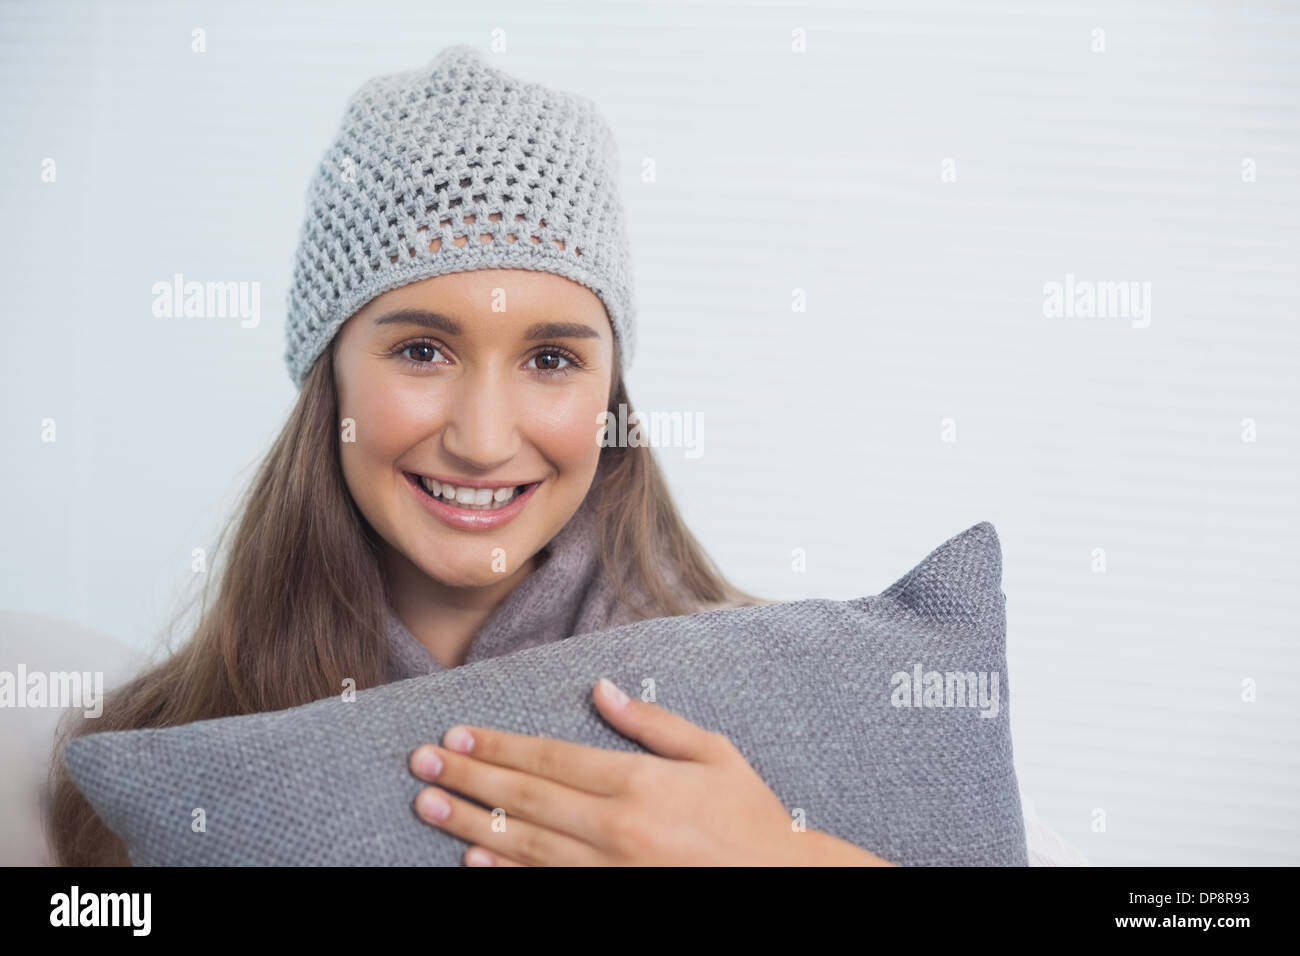 Happy pretty brunette with winter hat on posing Stock Photo